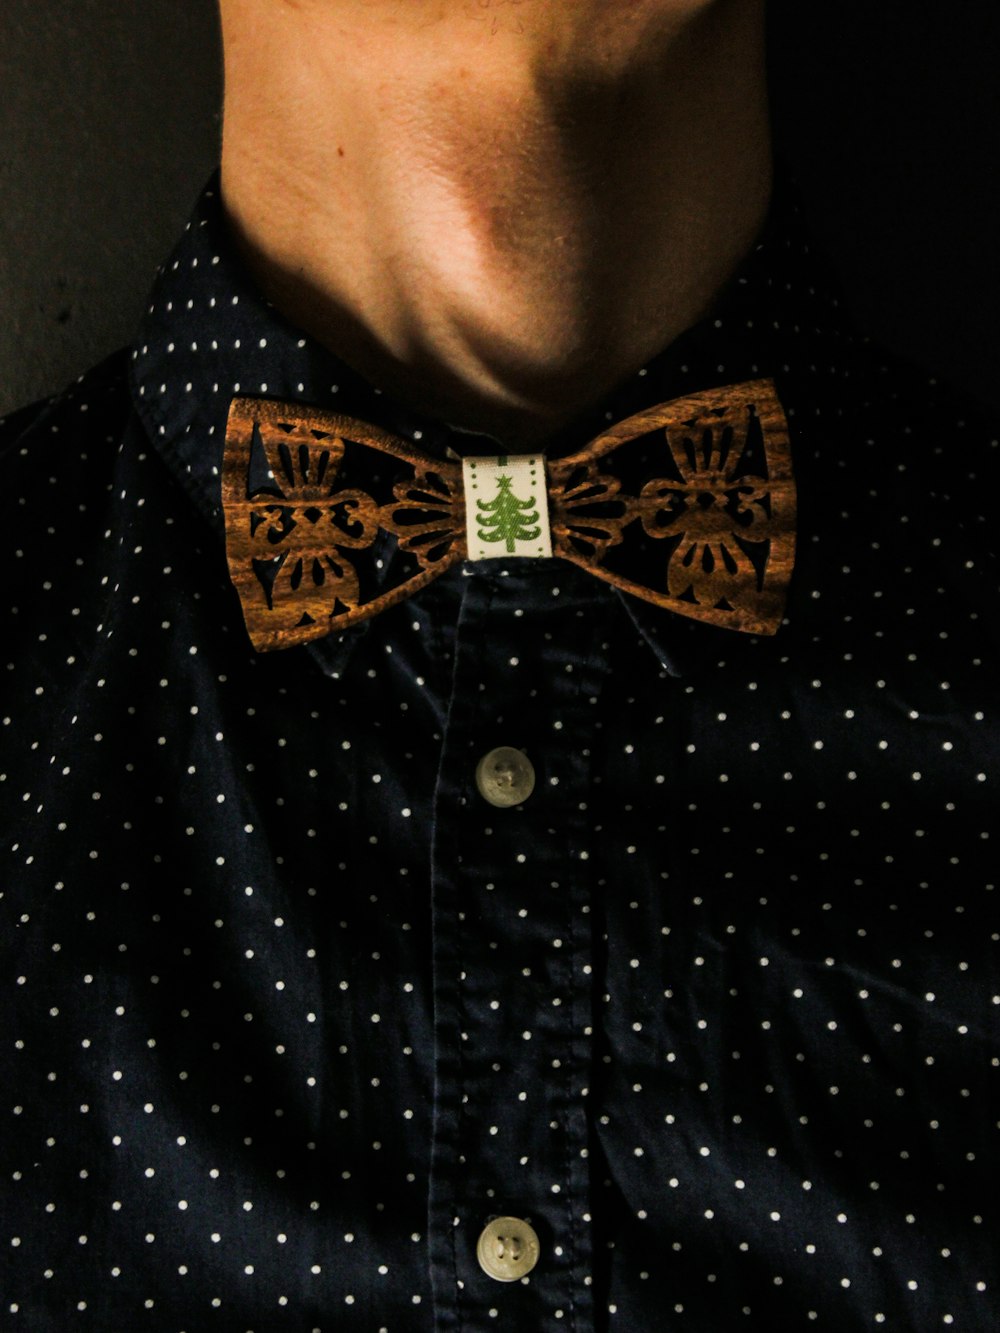 man in black and white polka dot shirt with brown bow tie